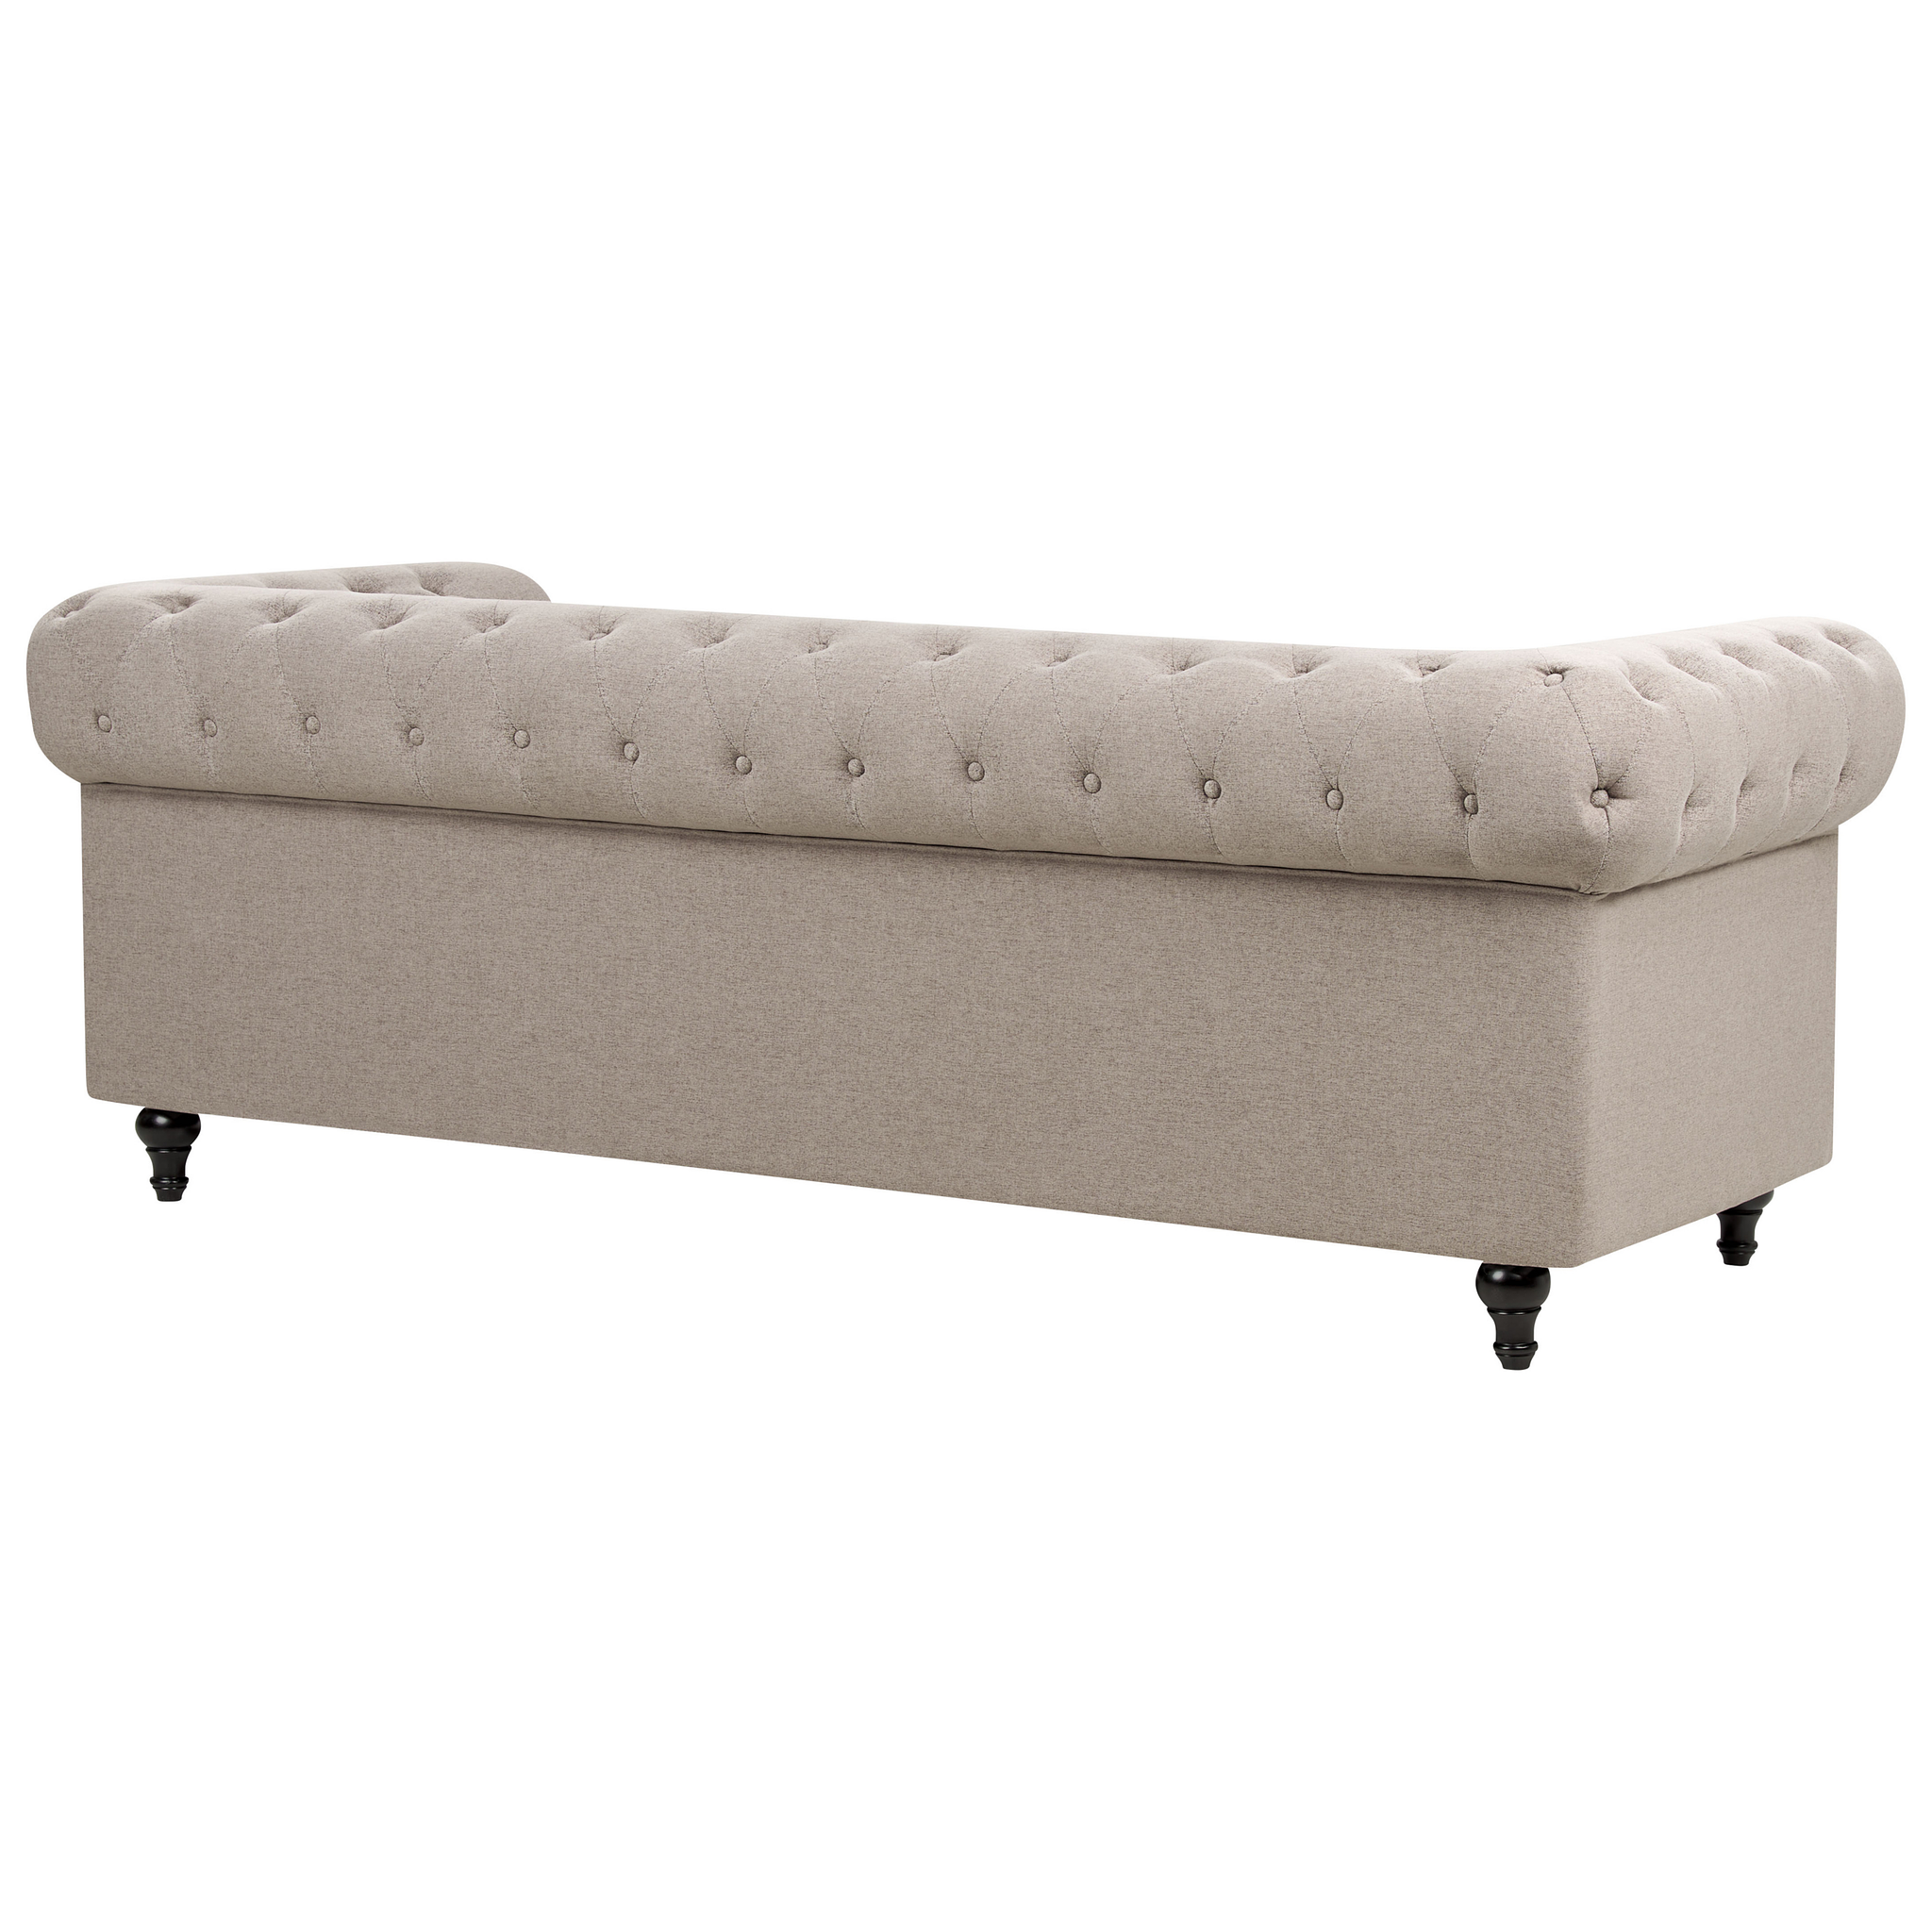 Beliani CHESTERFIELD - Chesterfield driezitsbank - Taupe - Polyester